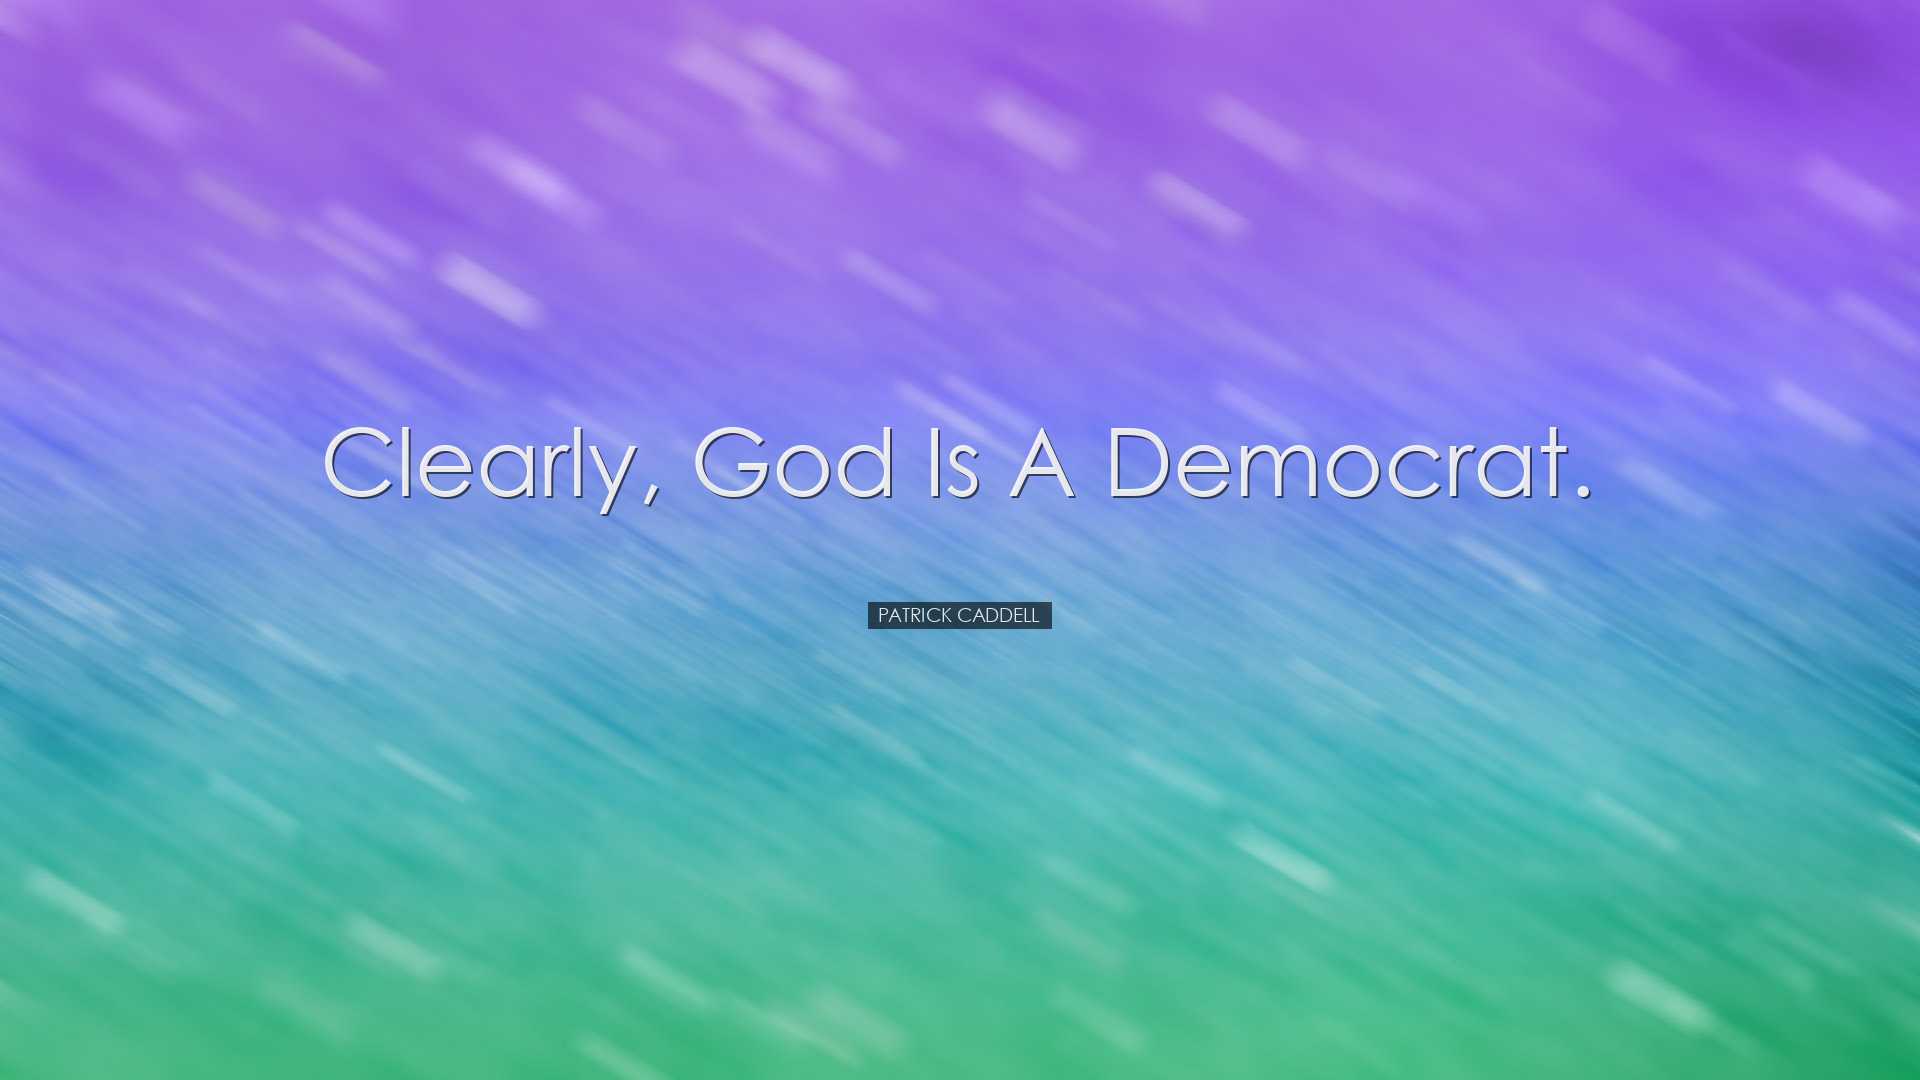 Clearly, God is a Democrat. - Patrick Caddell